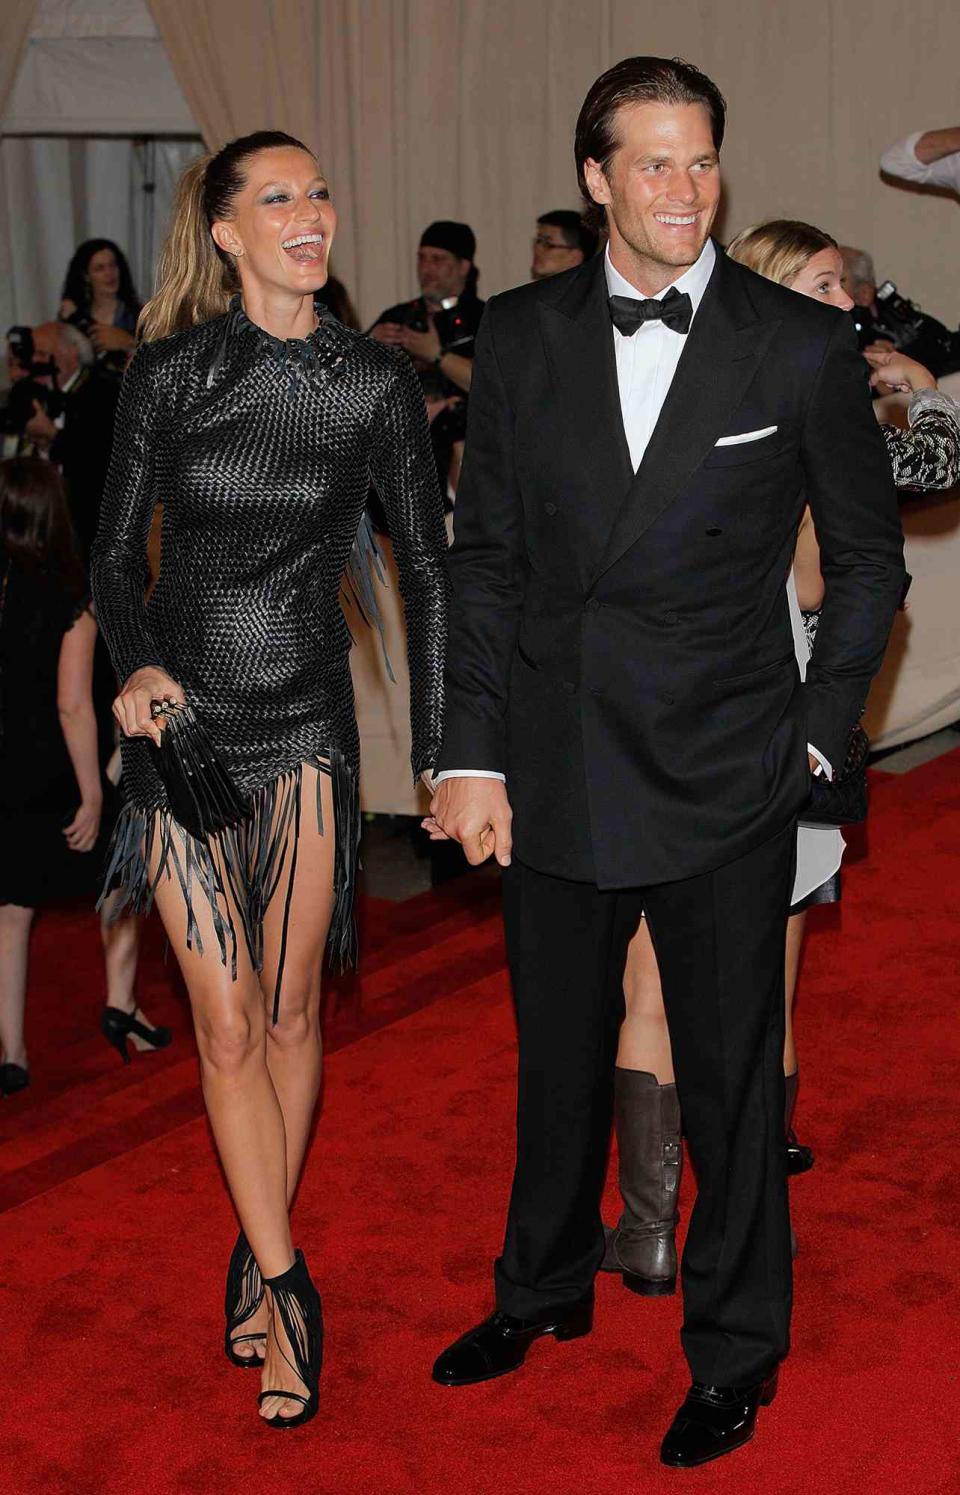 Gisele Bundchen and Tom Brady attends the Costume Institute Gala Benefit to celebrate the opening of the "American Woman: Fashioning a National Identity" exhibition at The Metropolitan Museum of Art on May 3, 2010 in New York City